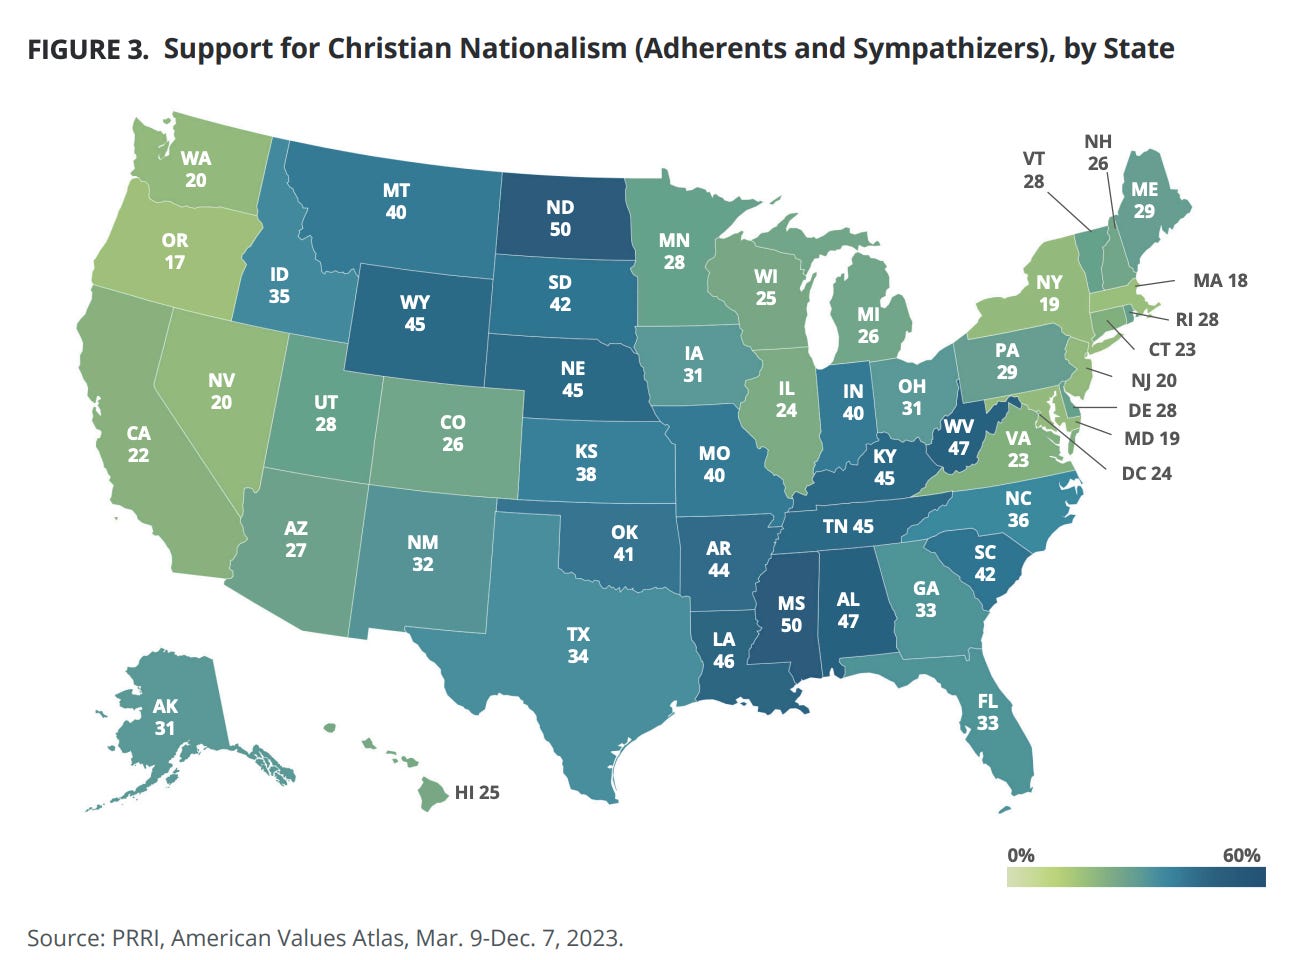 Heat map of the United States showing support for Christian nationalism by state